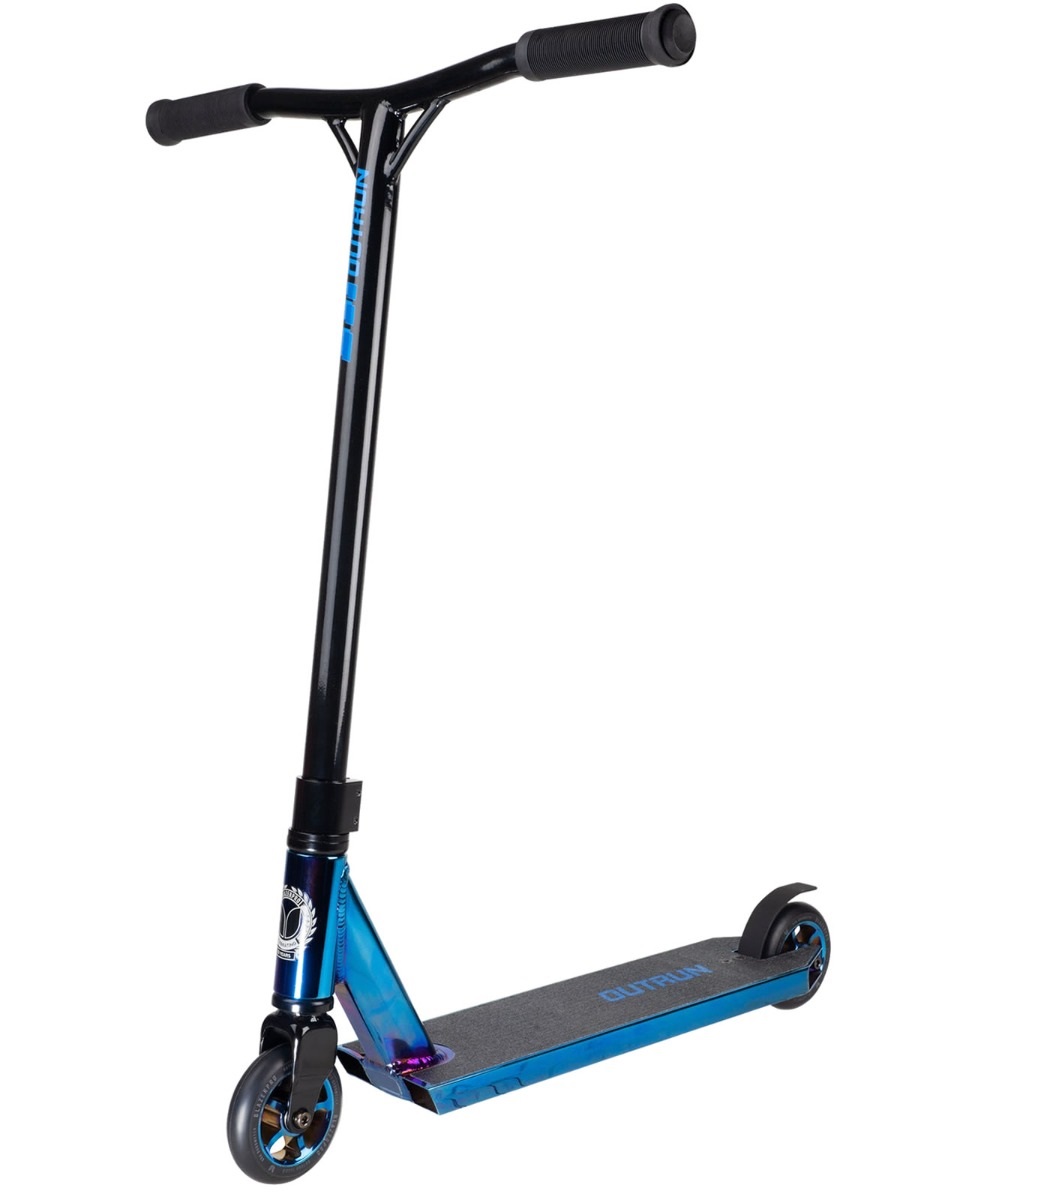 An image of Blazer Pro Outrun 2 FX Complete Pro Stunt Scooter - Blue Chrome